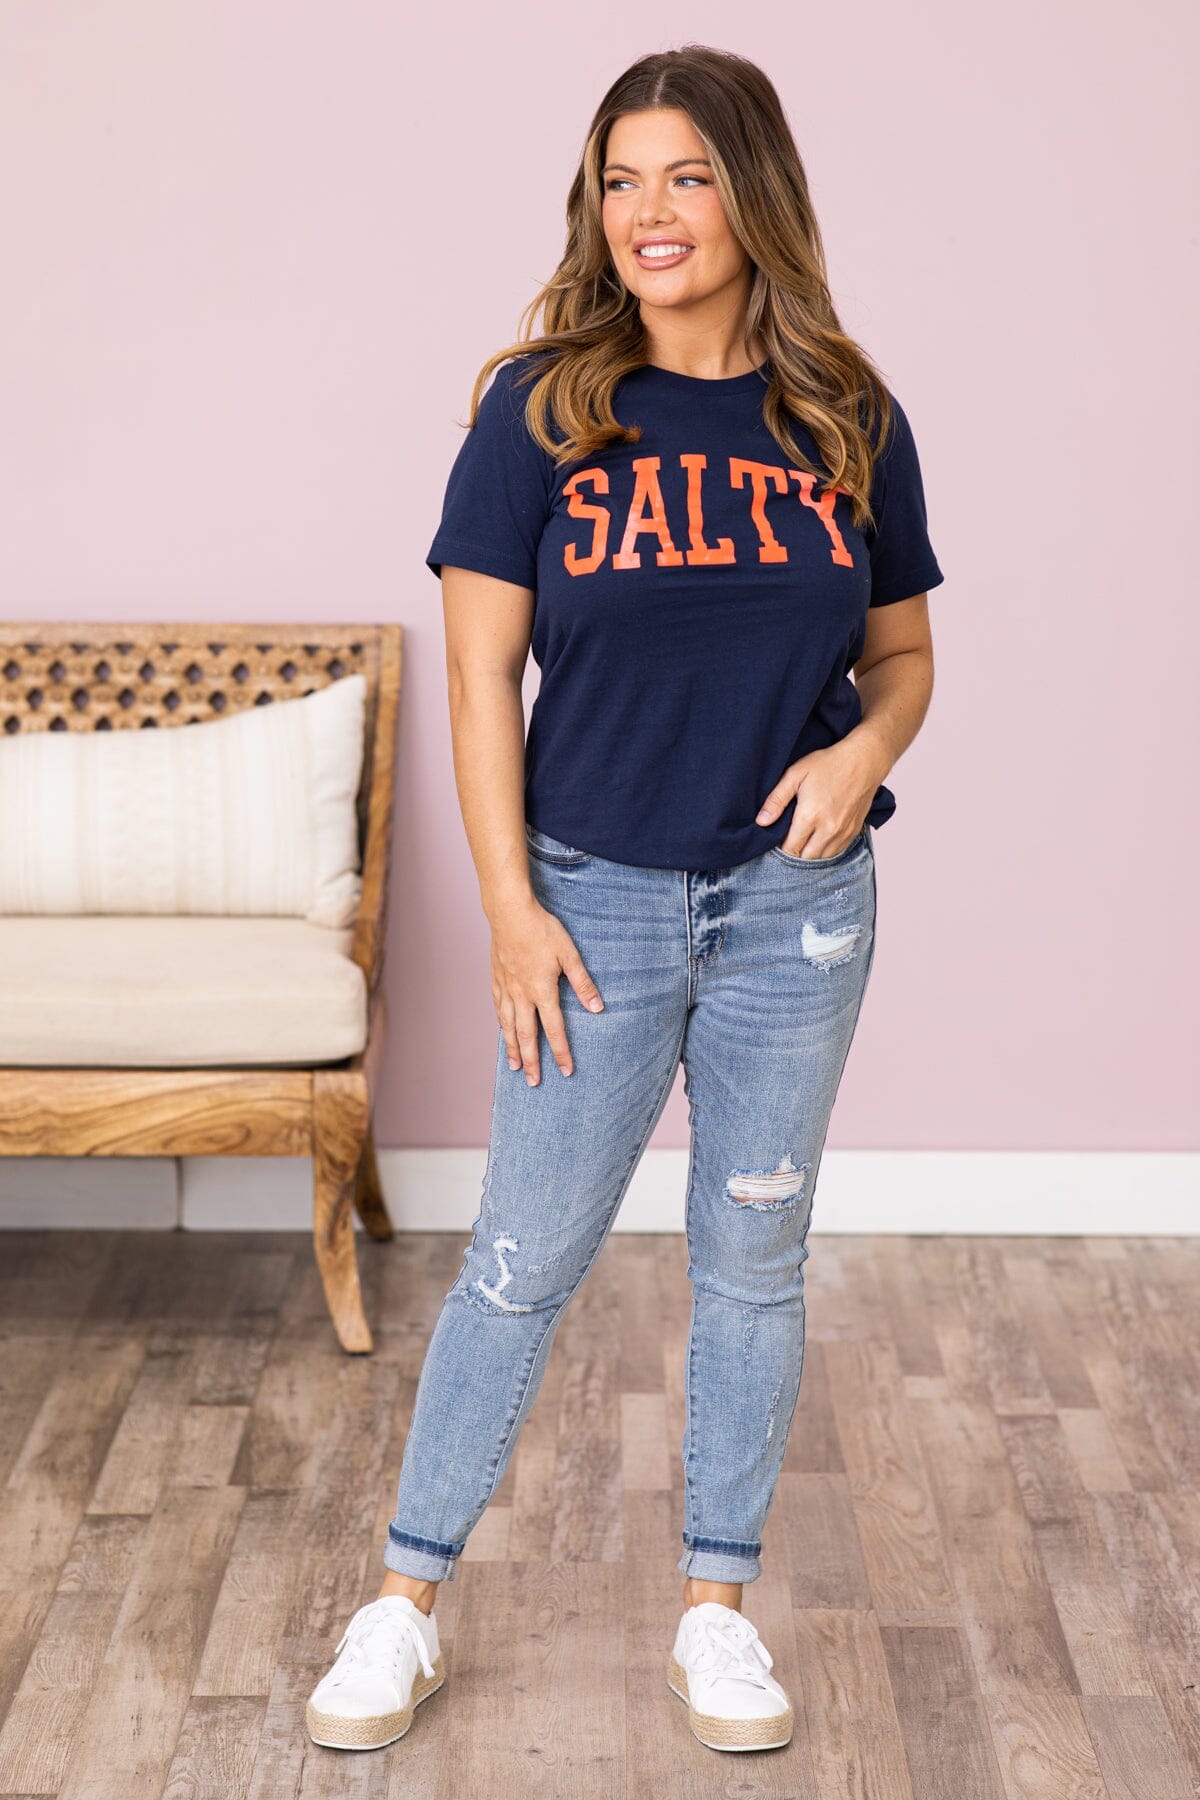 Navy and Orange Salty Graphic Tee - Filly Flair